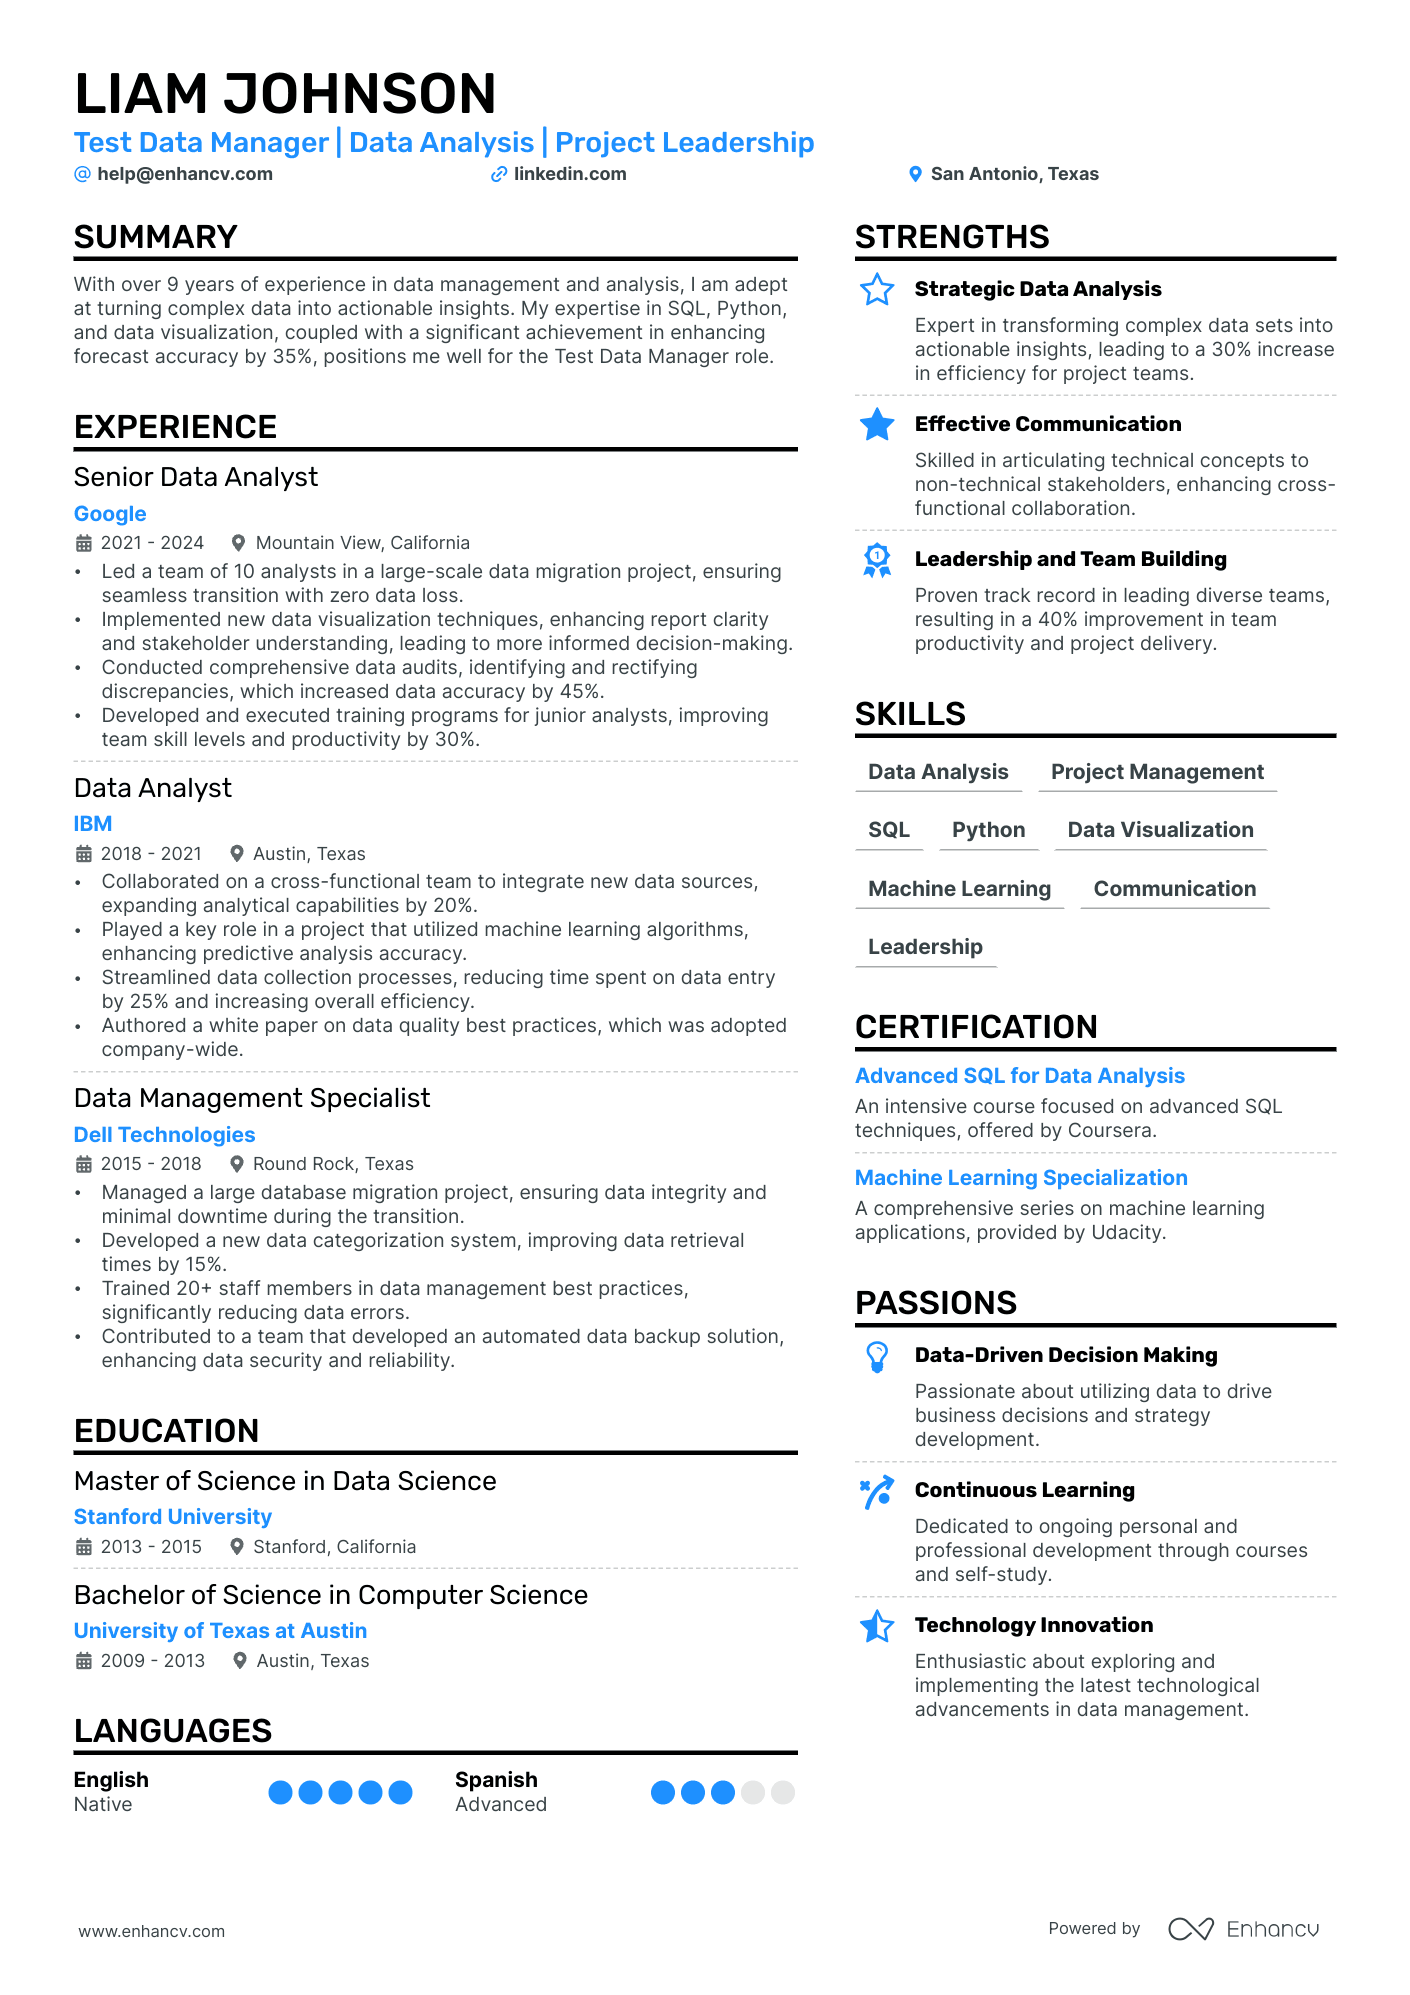 Data Manager resume example